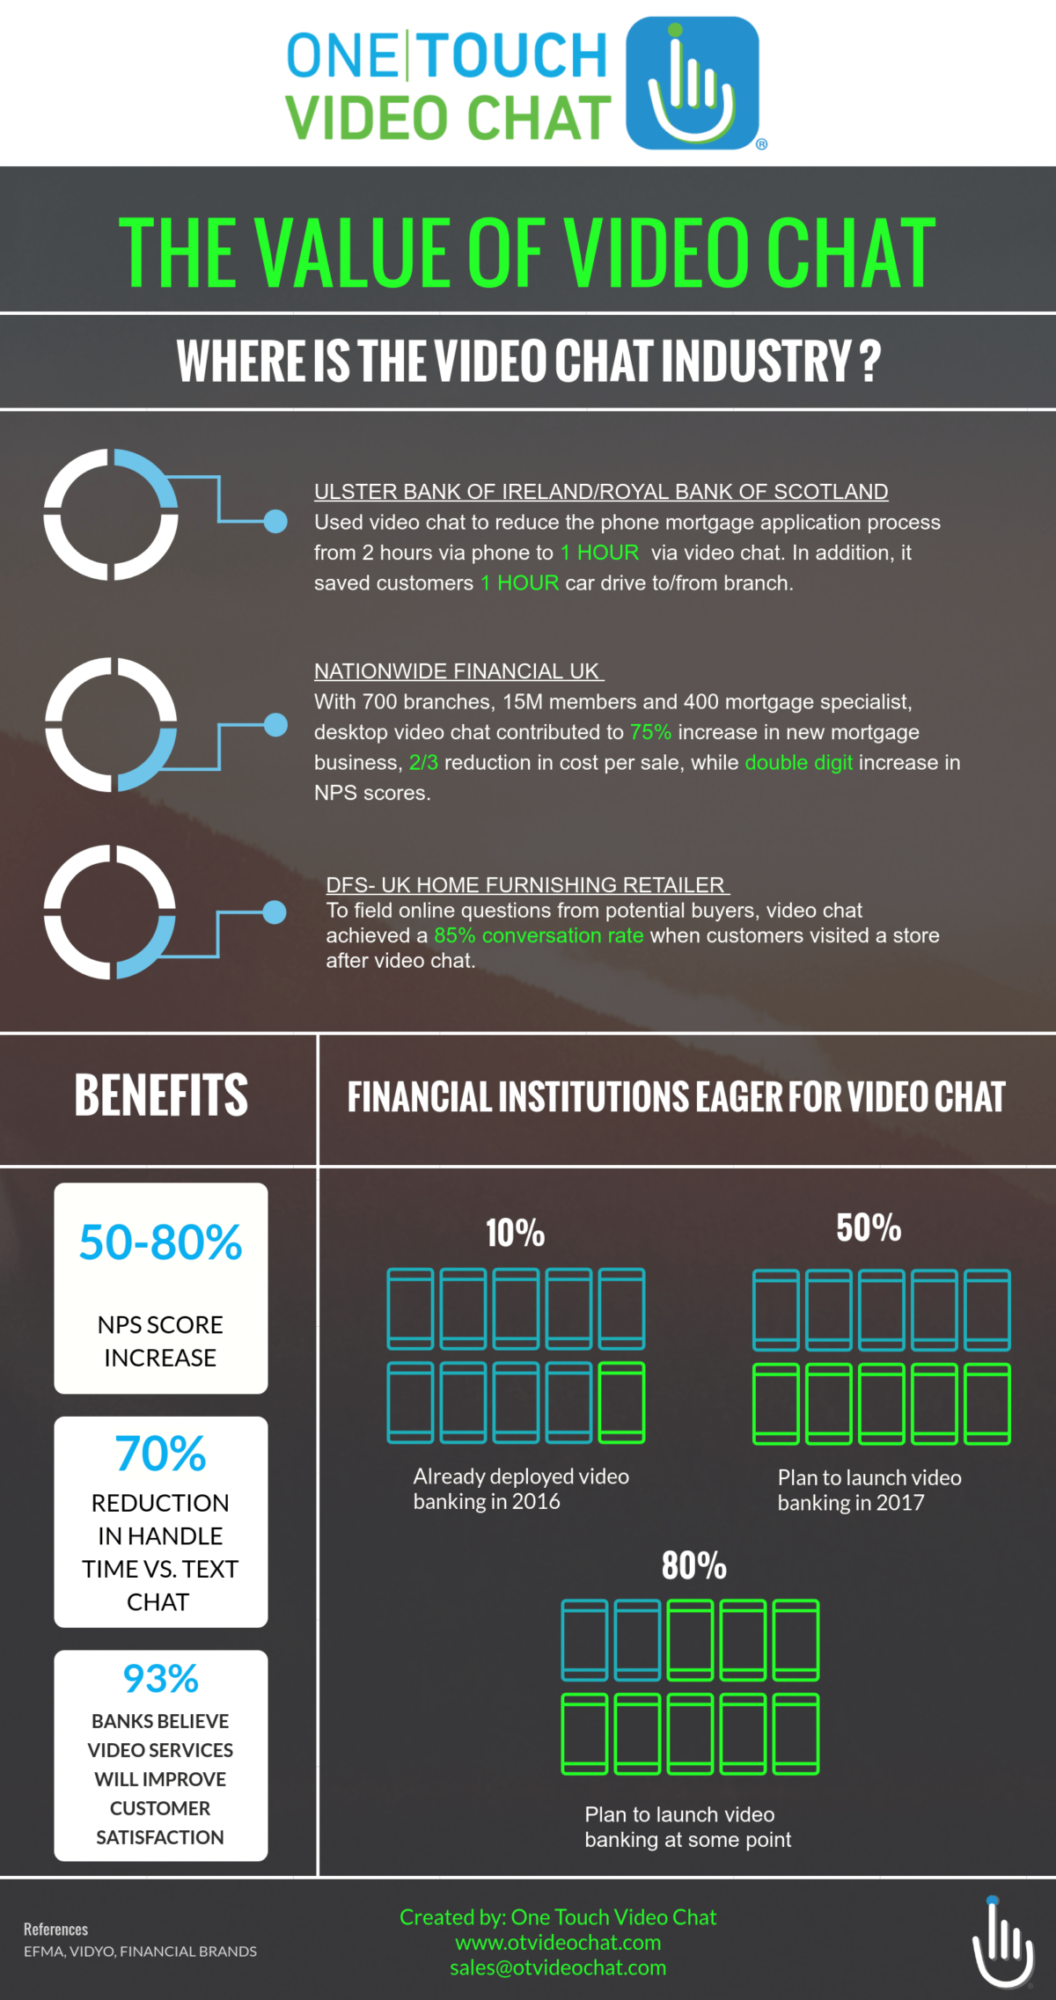 The Value of Video Chat for Financial Institutions